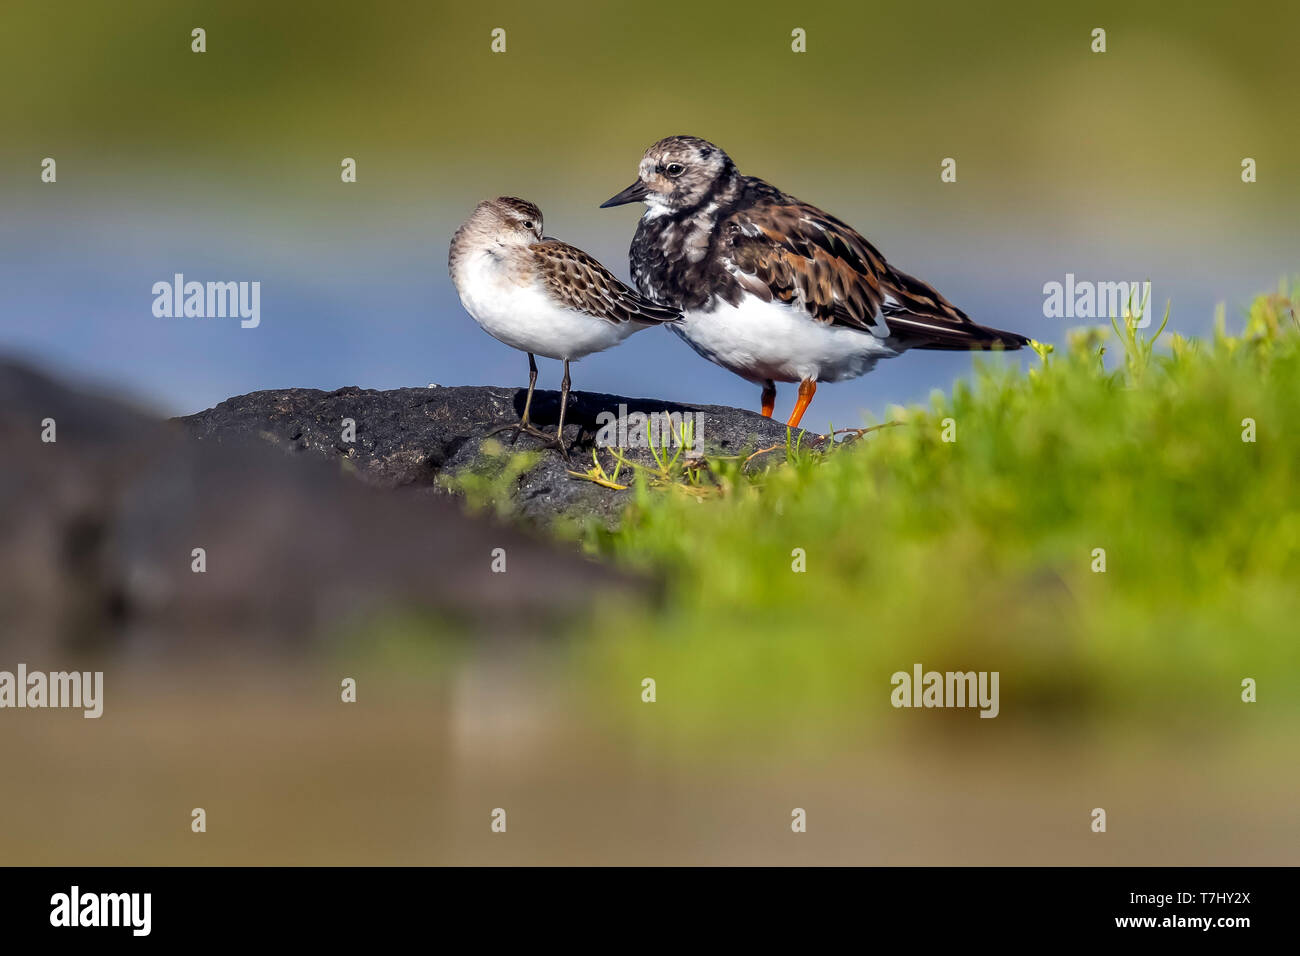 First winter Semipalmated Sandpiper sitting beside a Turnstone in Cabo da Praia quarry, Terceira, Azores. October 03, 2018. Stock Photo